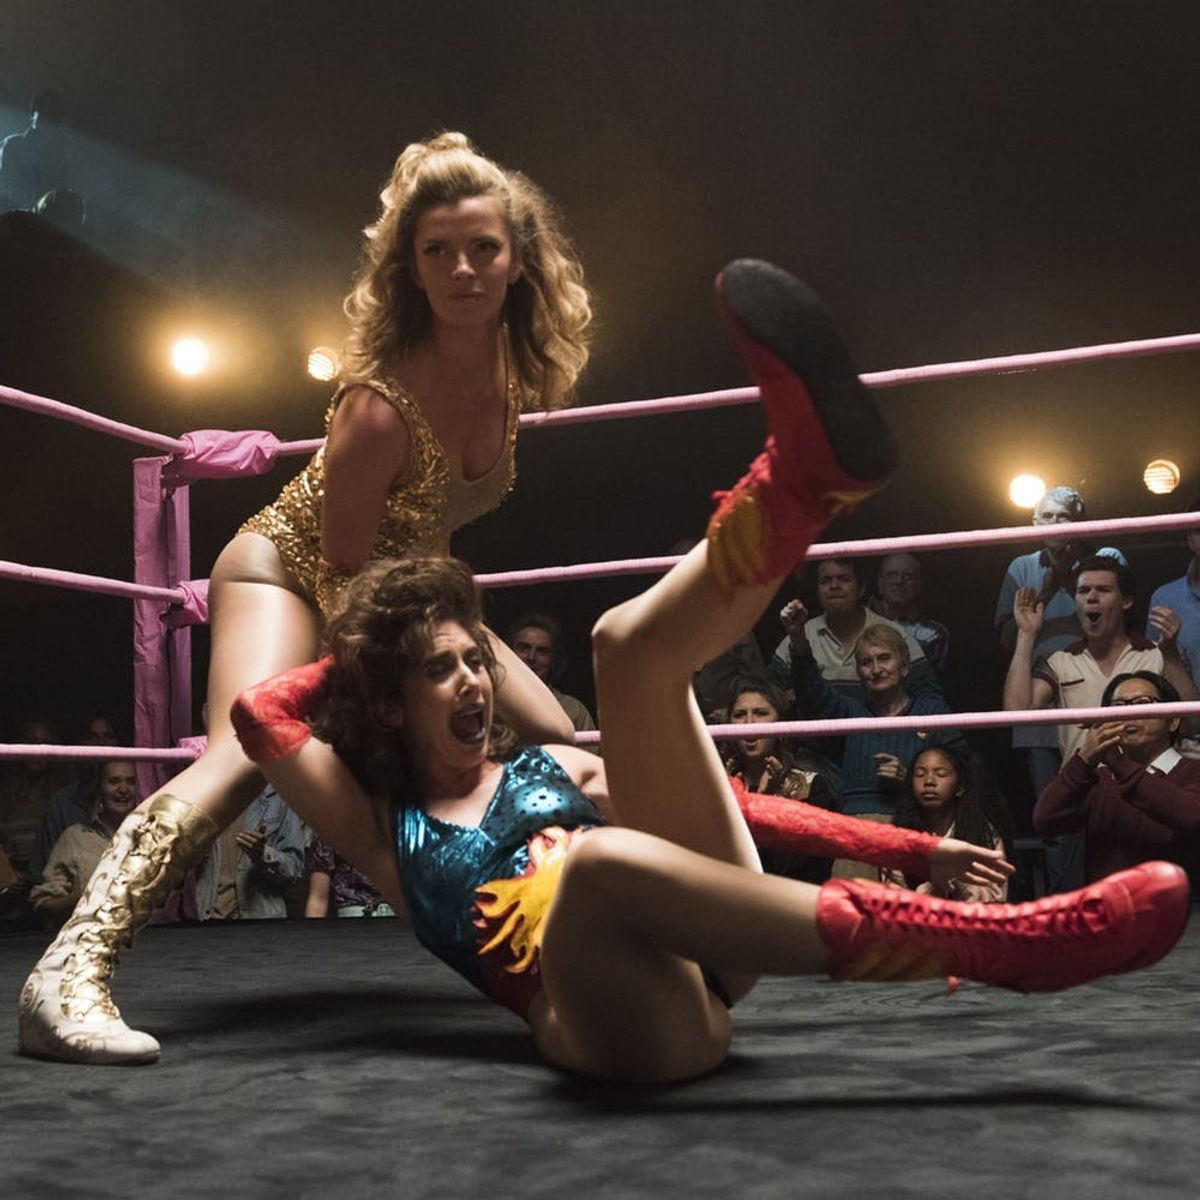 Alison Brie Just Shared the First Pic from the Set of “GLOW” Season 2